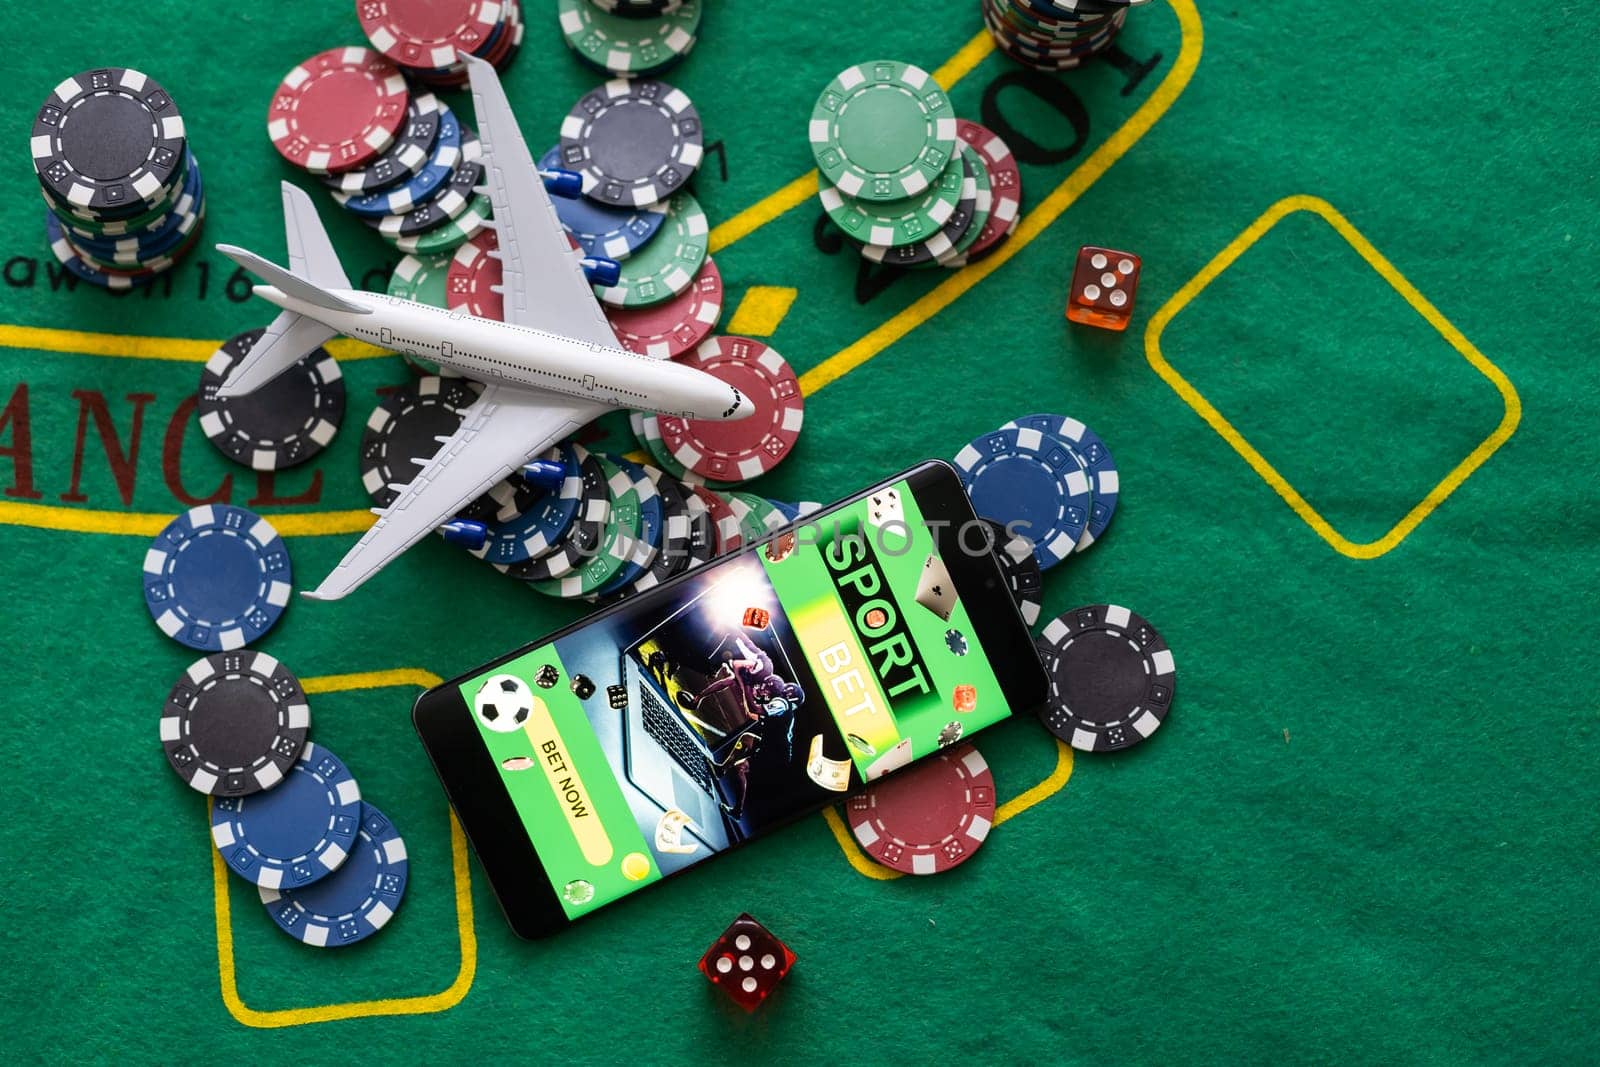 smartphone with betting on sports, casino, toy plane